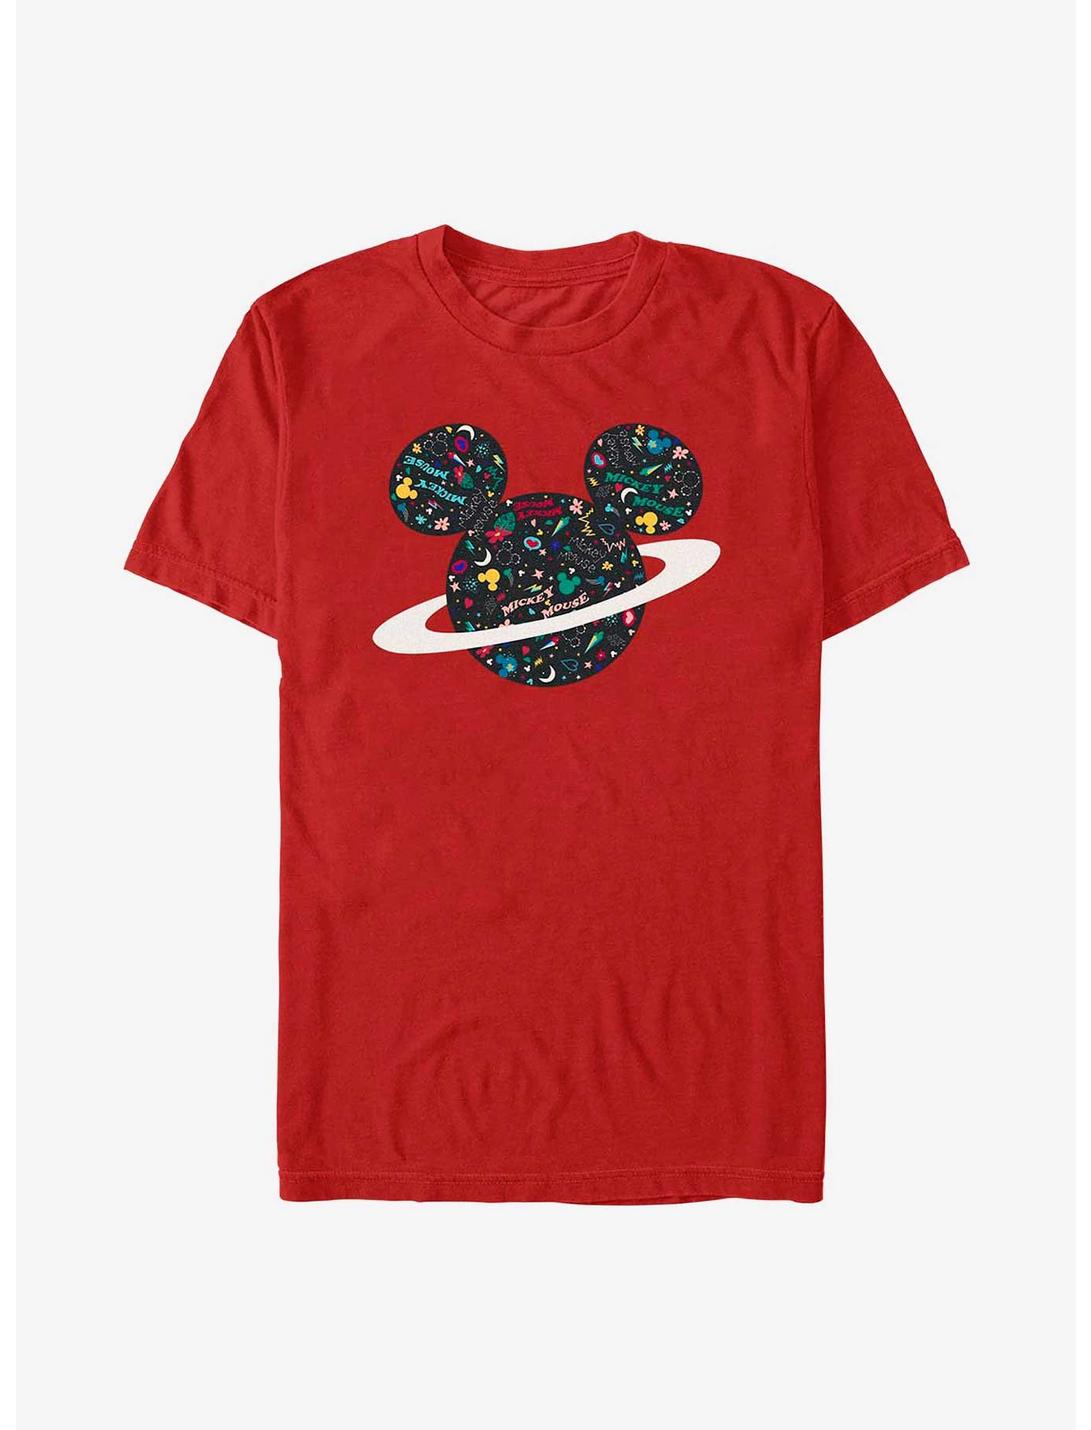 Disney Mickey Mouse Planet Mickey T-Shirt, RED, hi-res